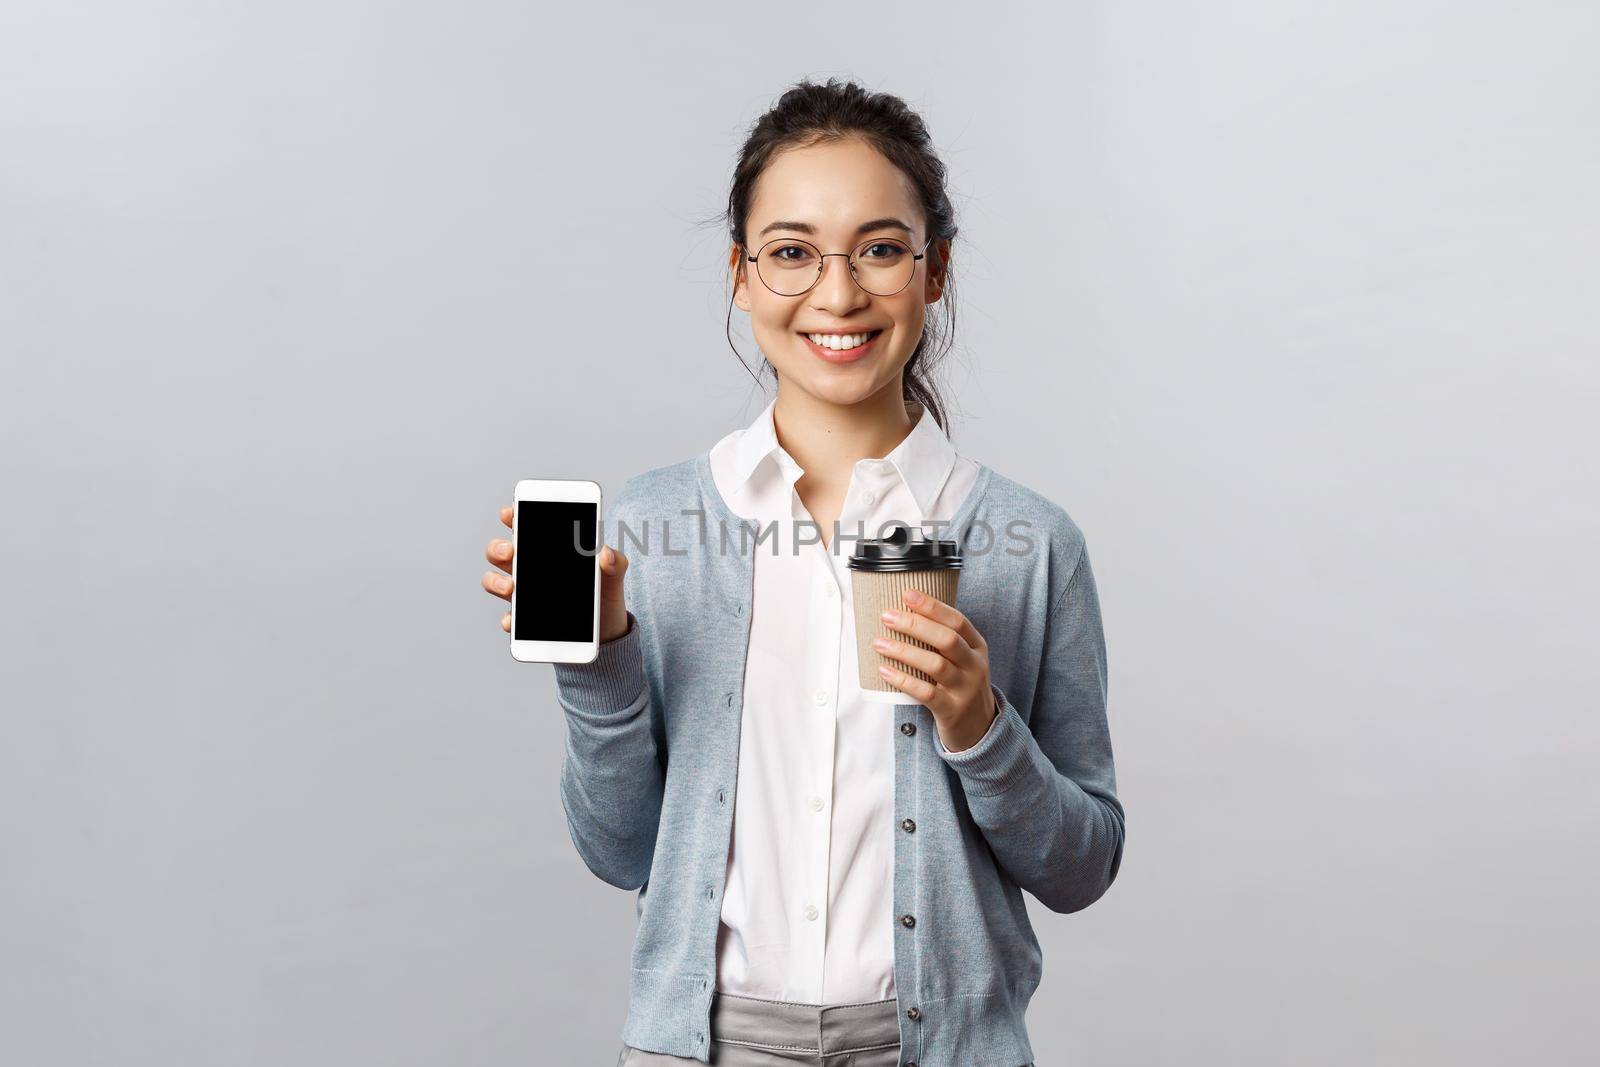 Office lifestyle, business and people concept. Young enthusiastic female teacher or tutor recommend use smartphone application to study during quarantine, drinking coffee, smiling show mobile phone.